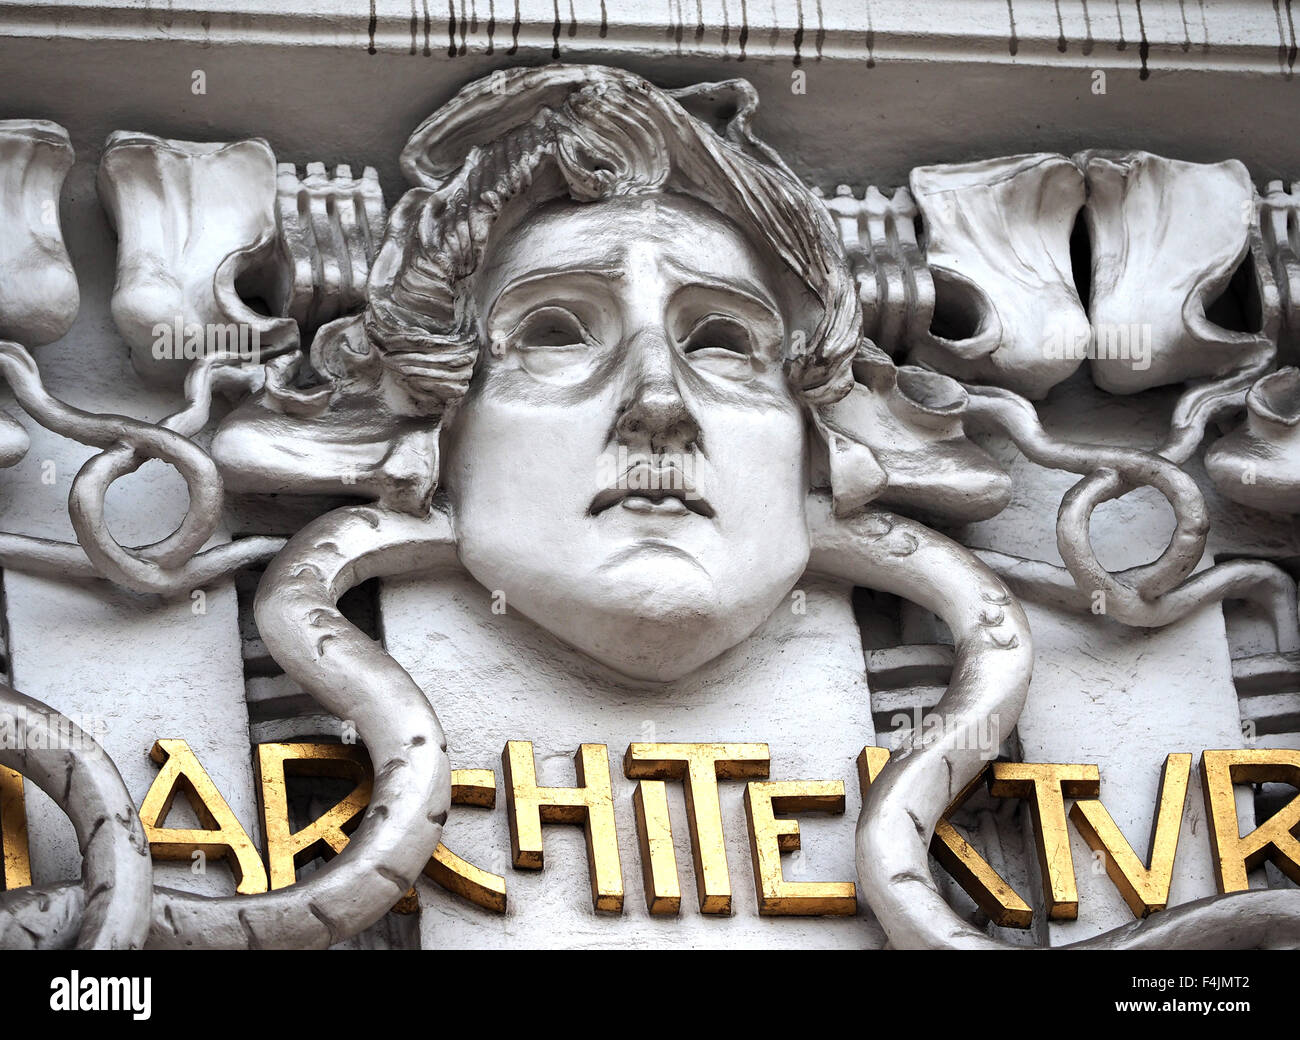 The Secession Building, Vienna, Austria. Close up of one of the Gorgon heads. Stock Photo